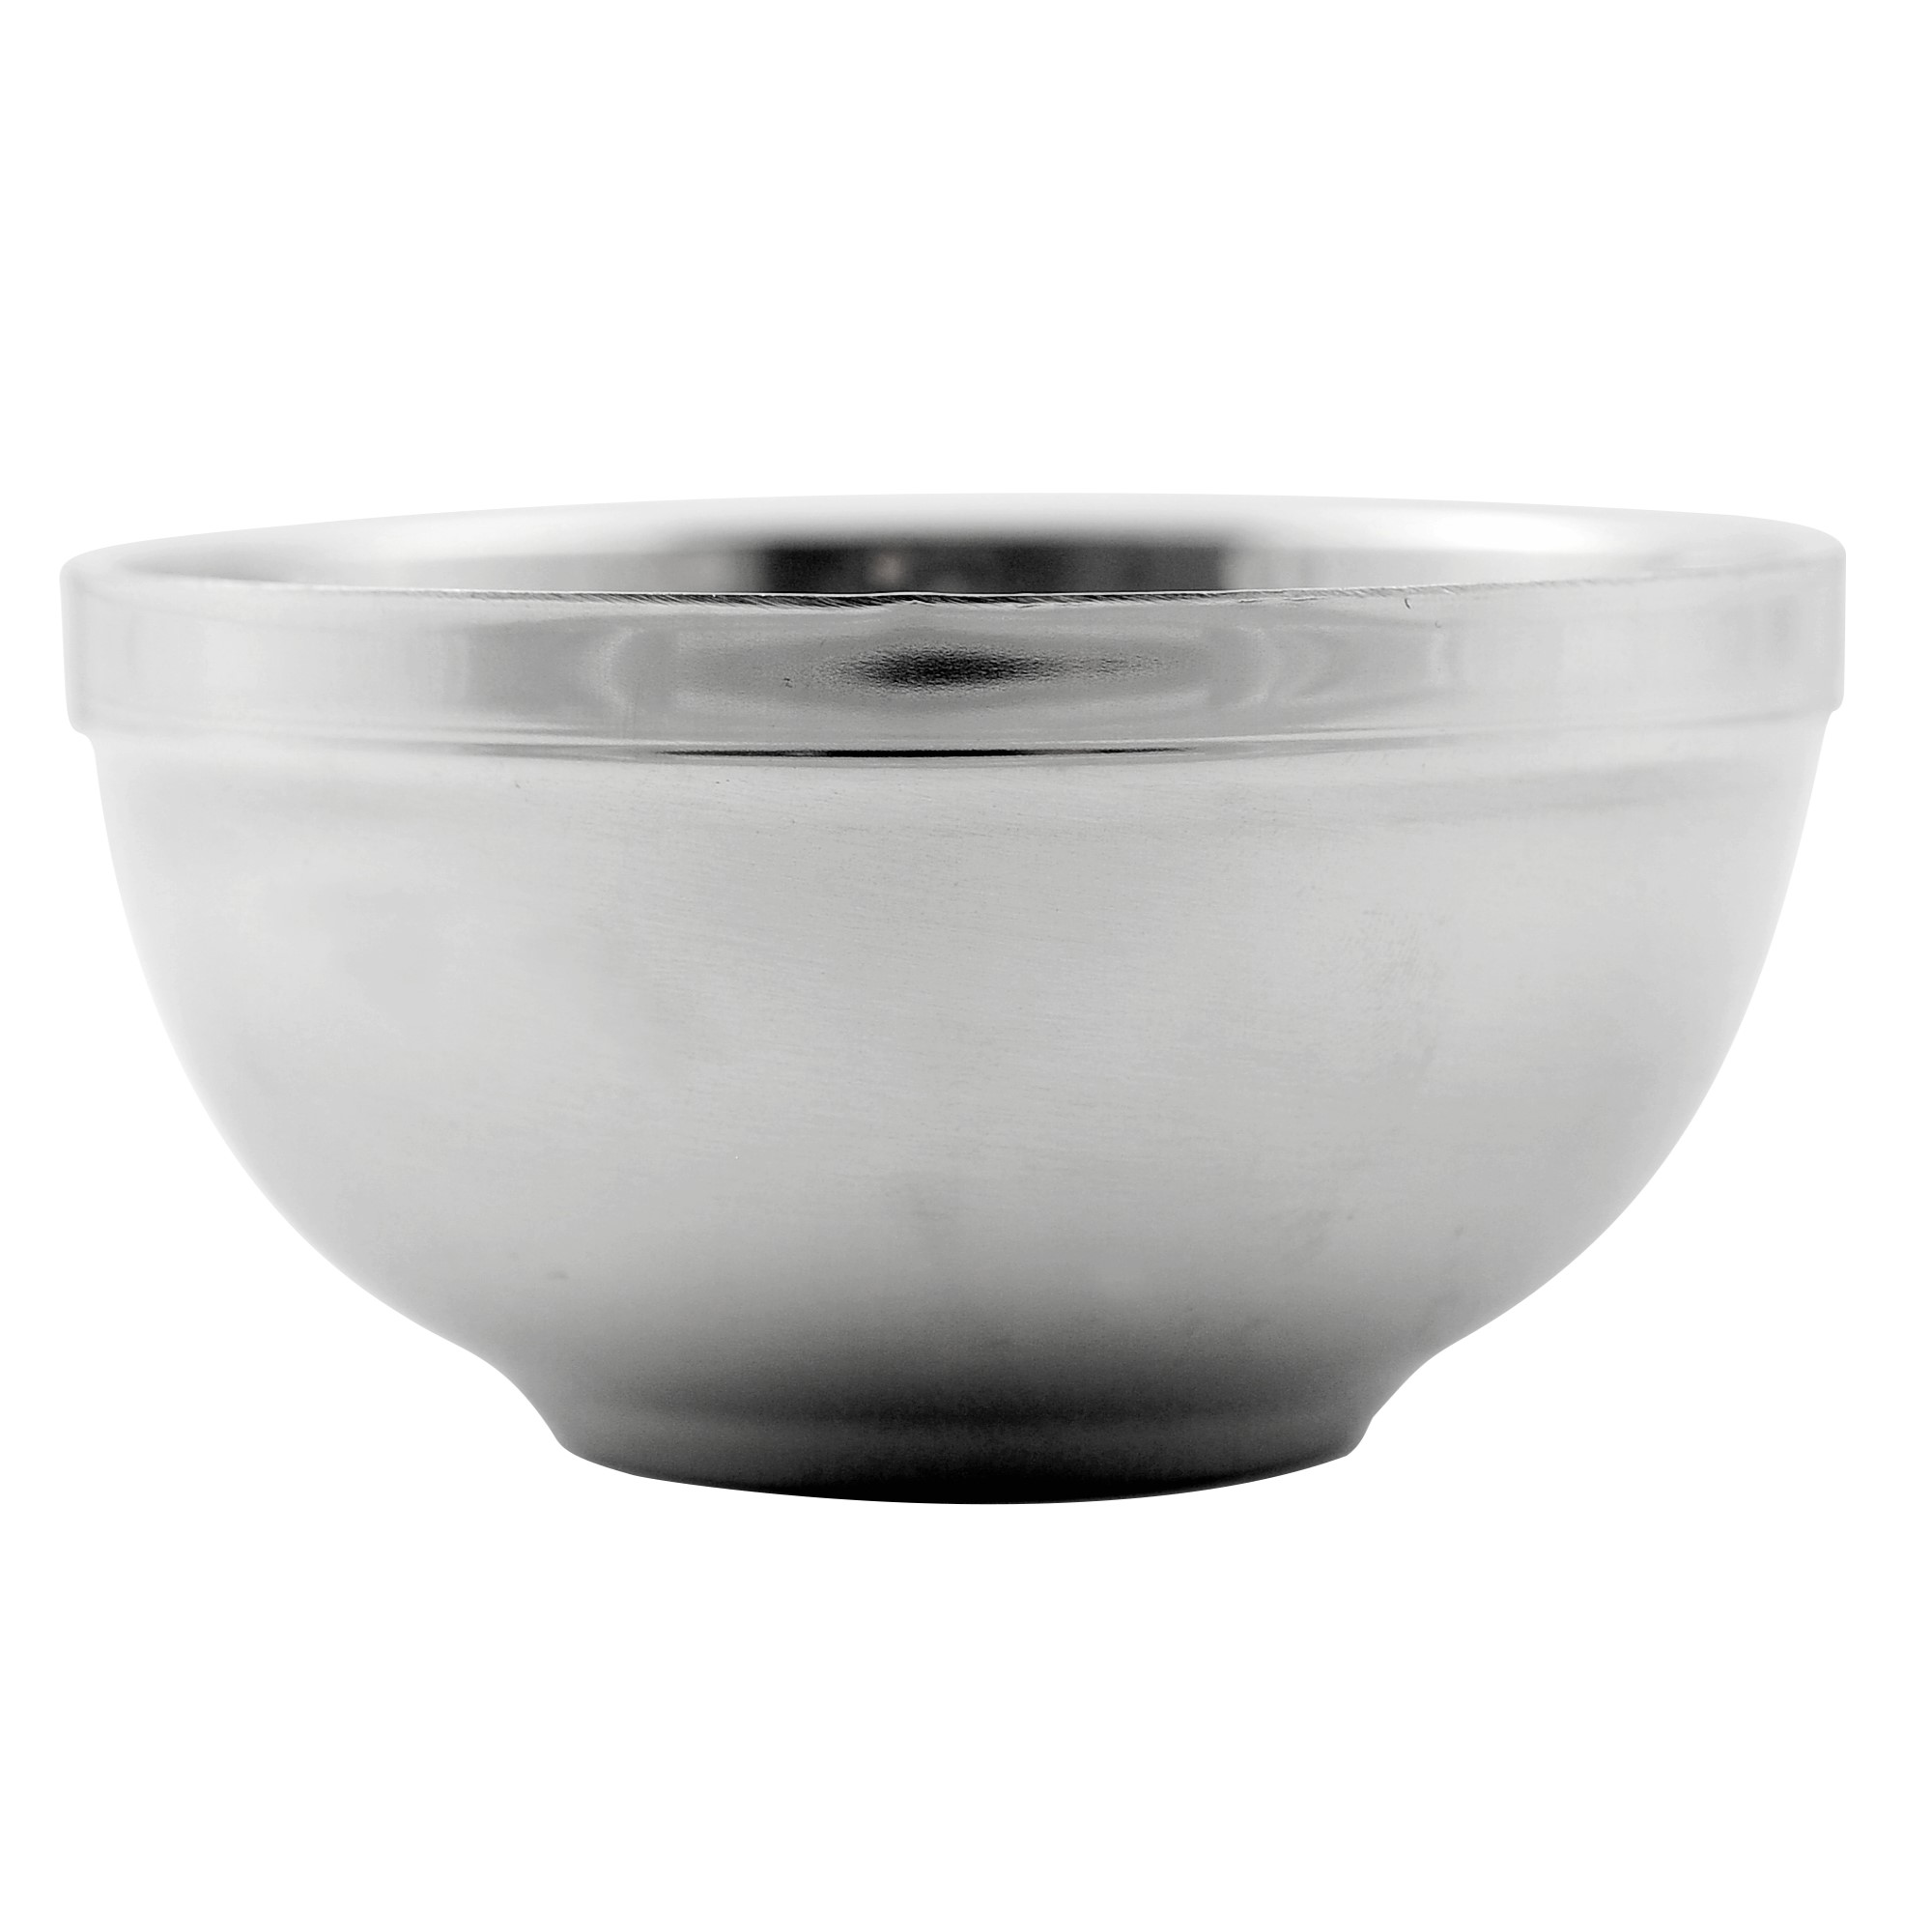 Double-layer insulation bowl 14CM, , large